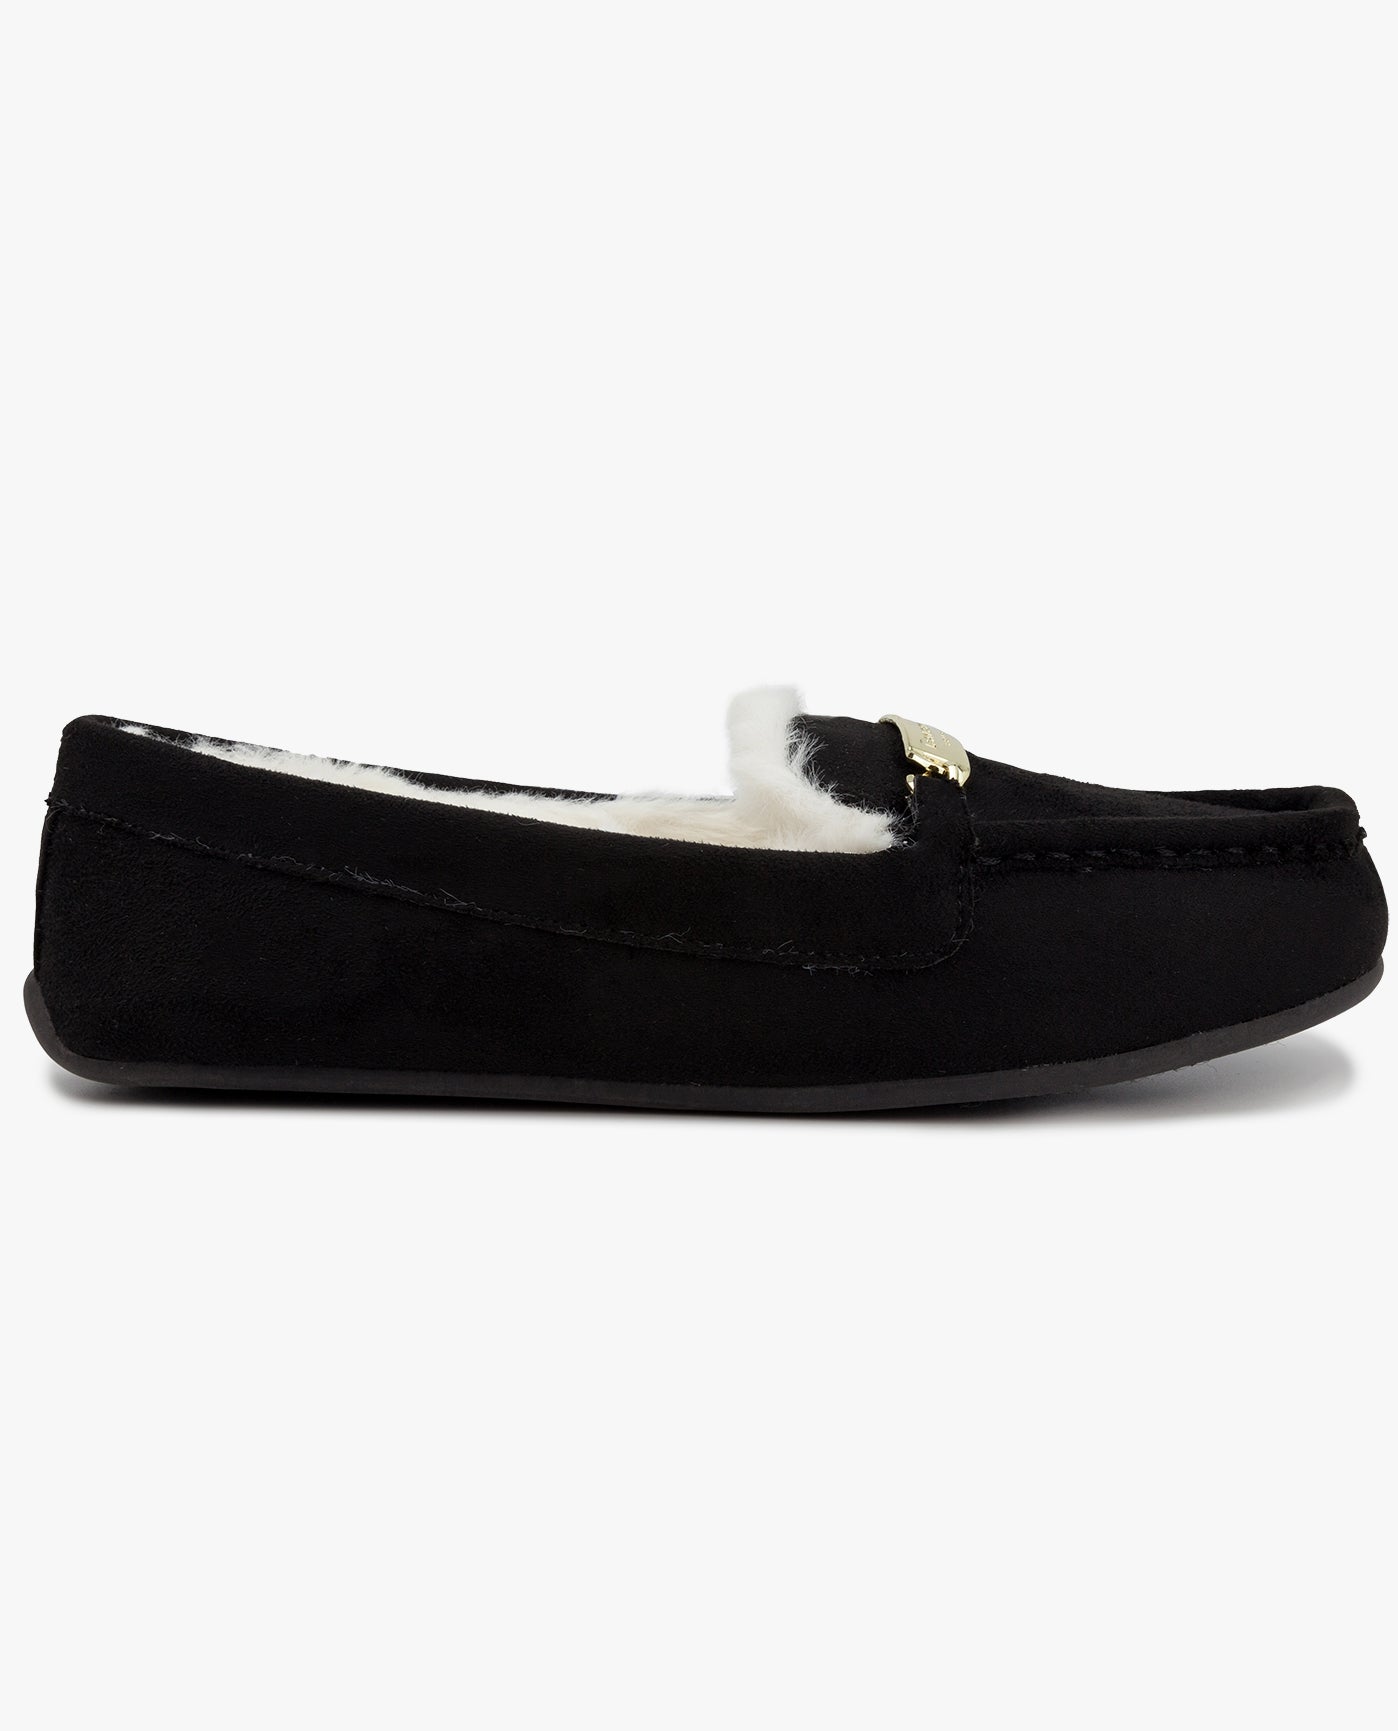 SIDE VIEW  OF WOMENS LISA MOCCASIN SLIPPER | ESO_BLACK_001